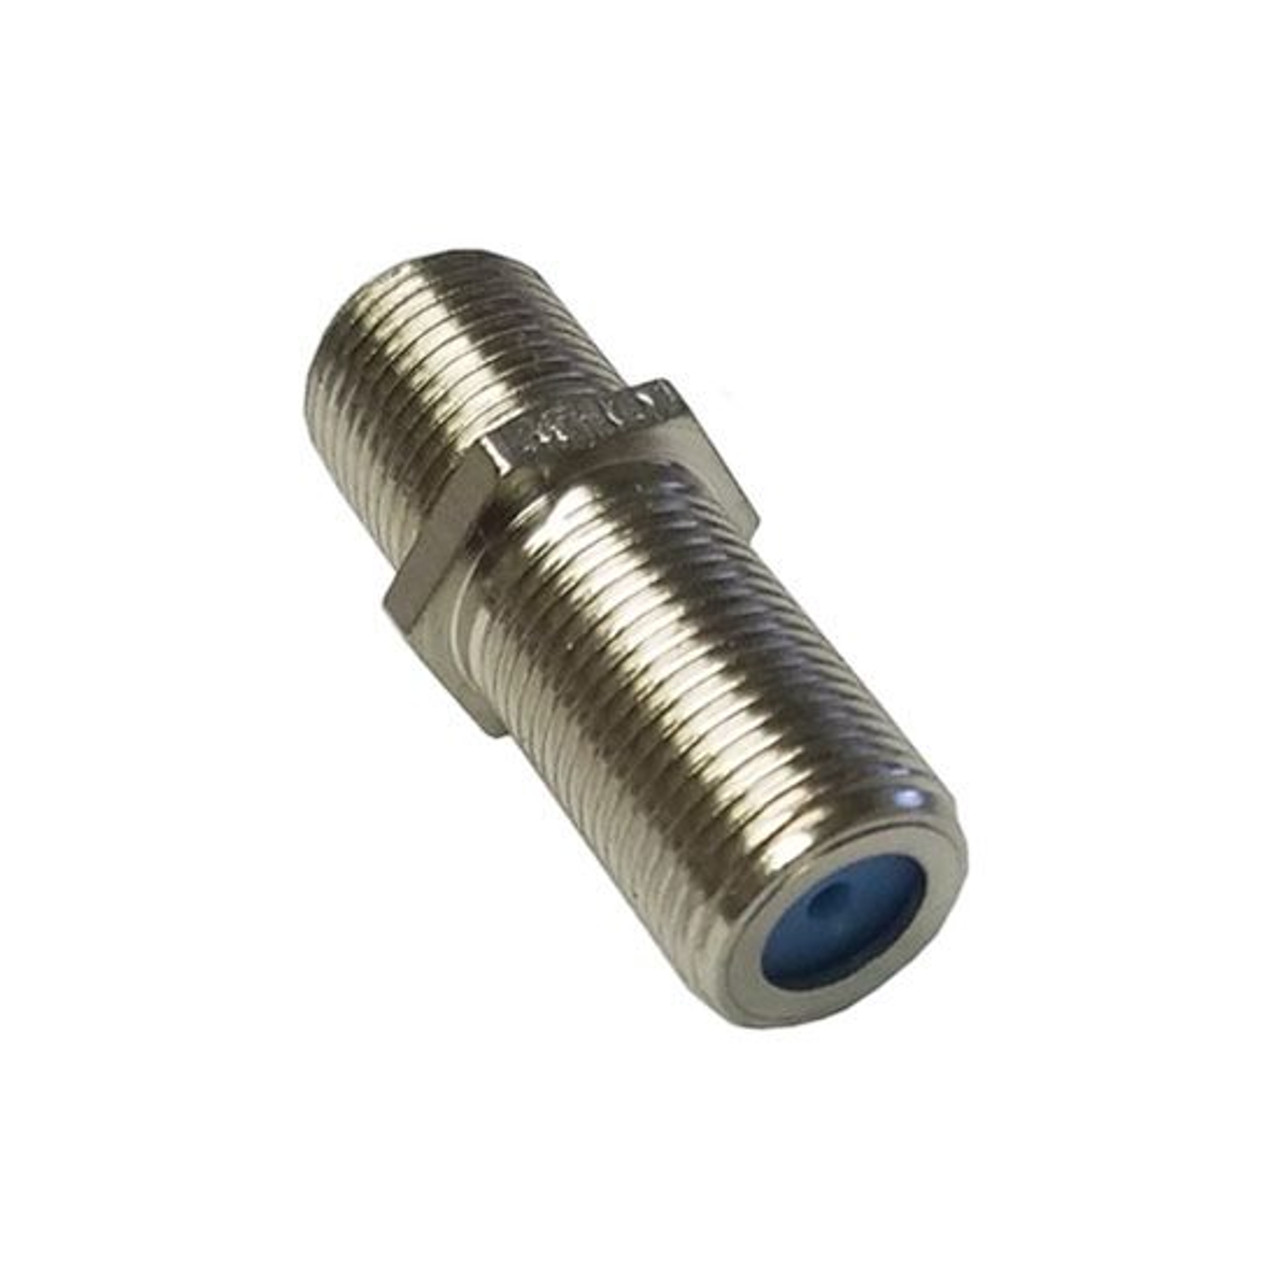 Steren 200-058 3 GHz F-81 Coupler 1" Long Barrel Splice Coaxial Cable High Frequency 1 Pack Female to Female Adapter Connector Cable Coax Barrel Jointer Coupling Audio Video Coaxial Cable Splice Plug Extension, Part # 200058